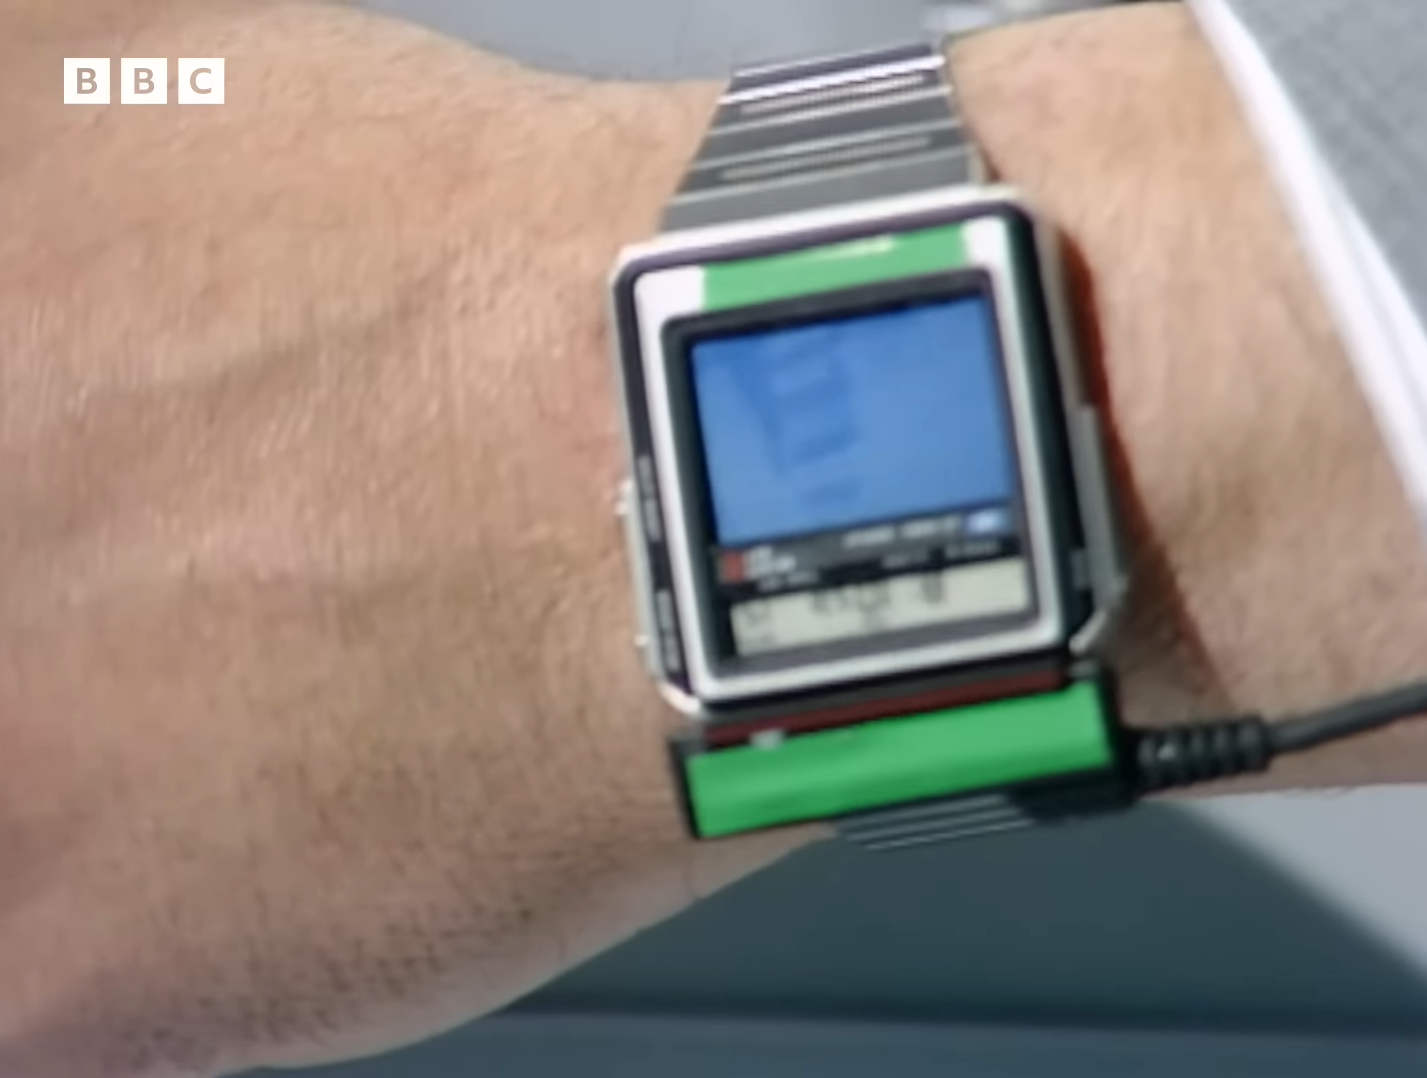 Wigs, smartwatches, and VR: how the man of the future was imagined in 1987. Video